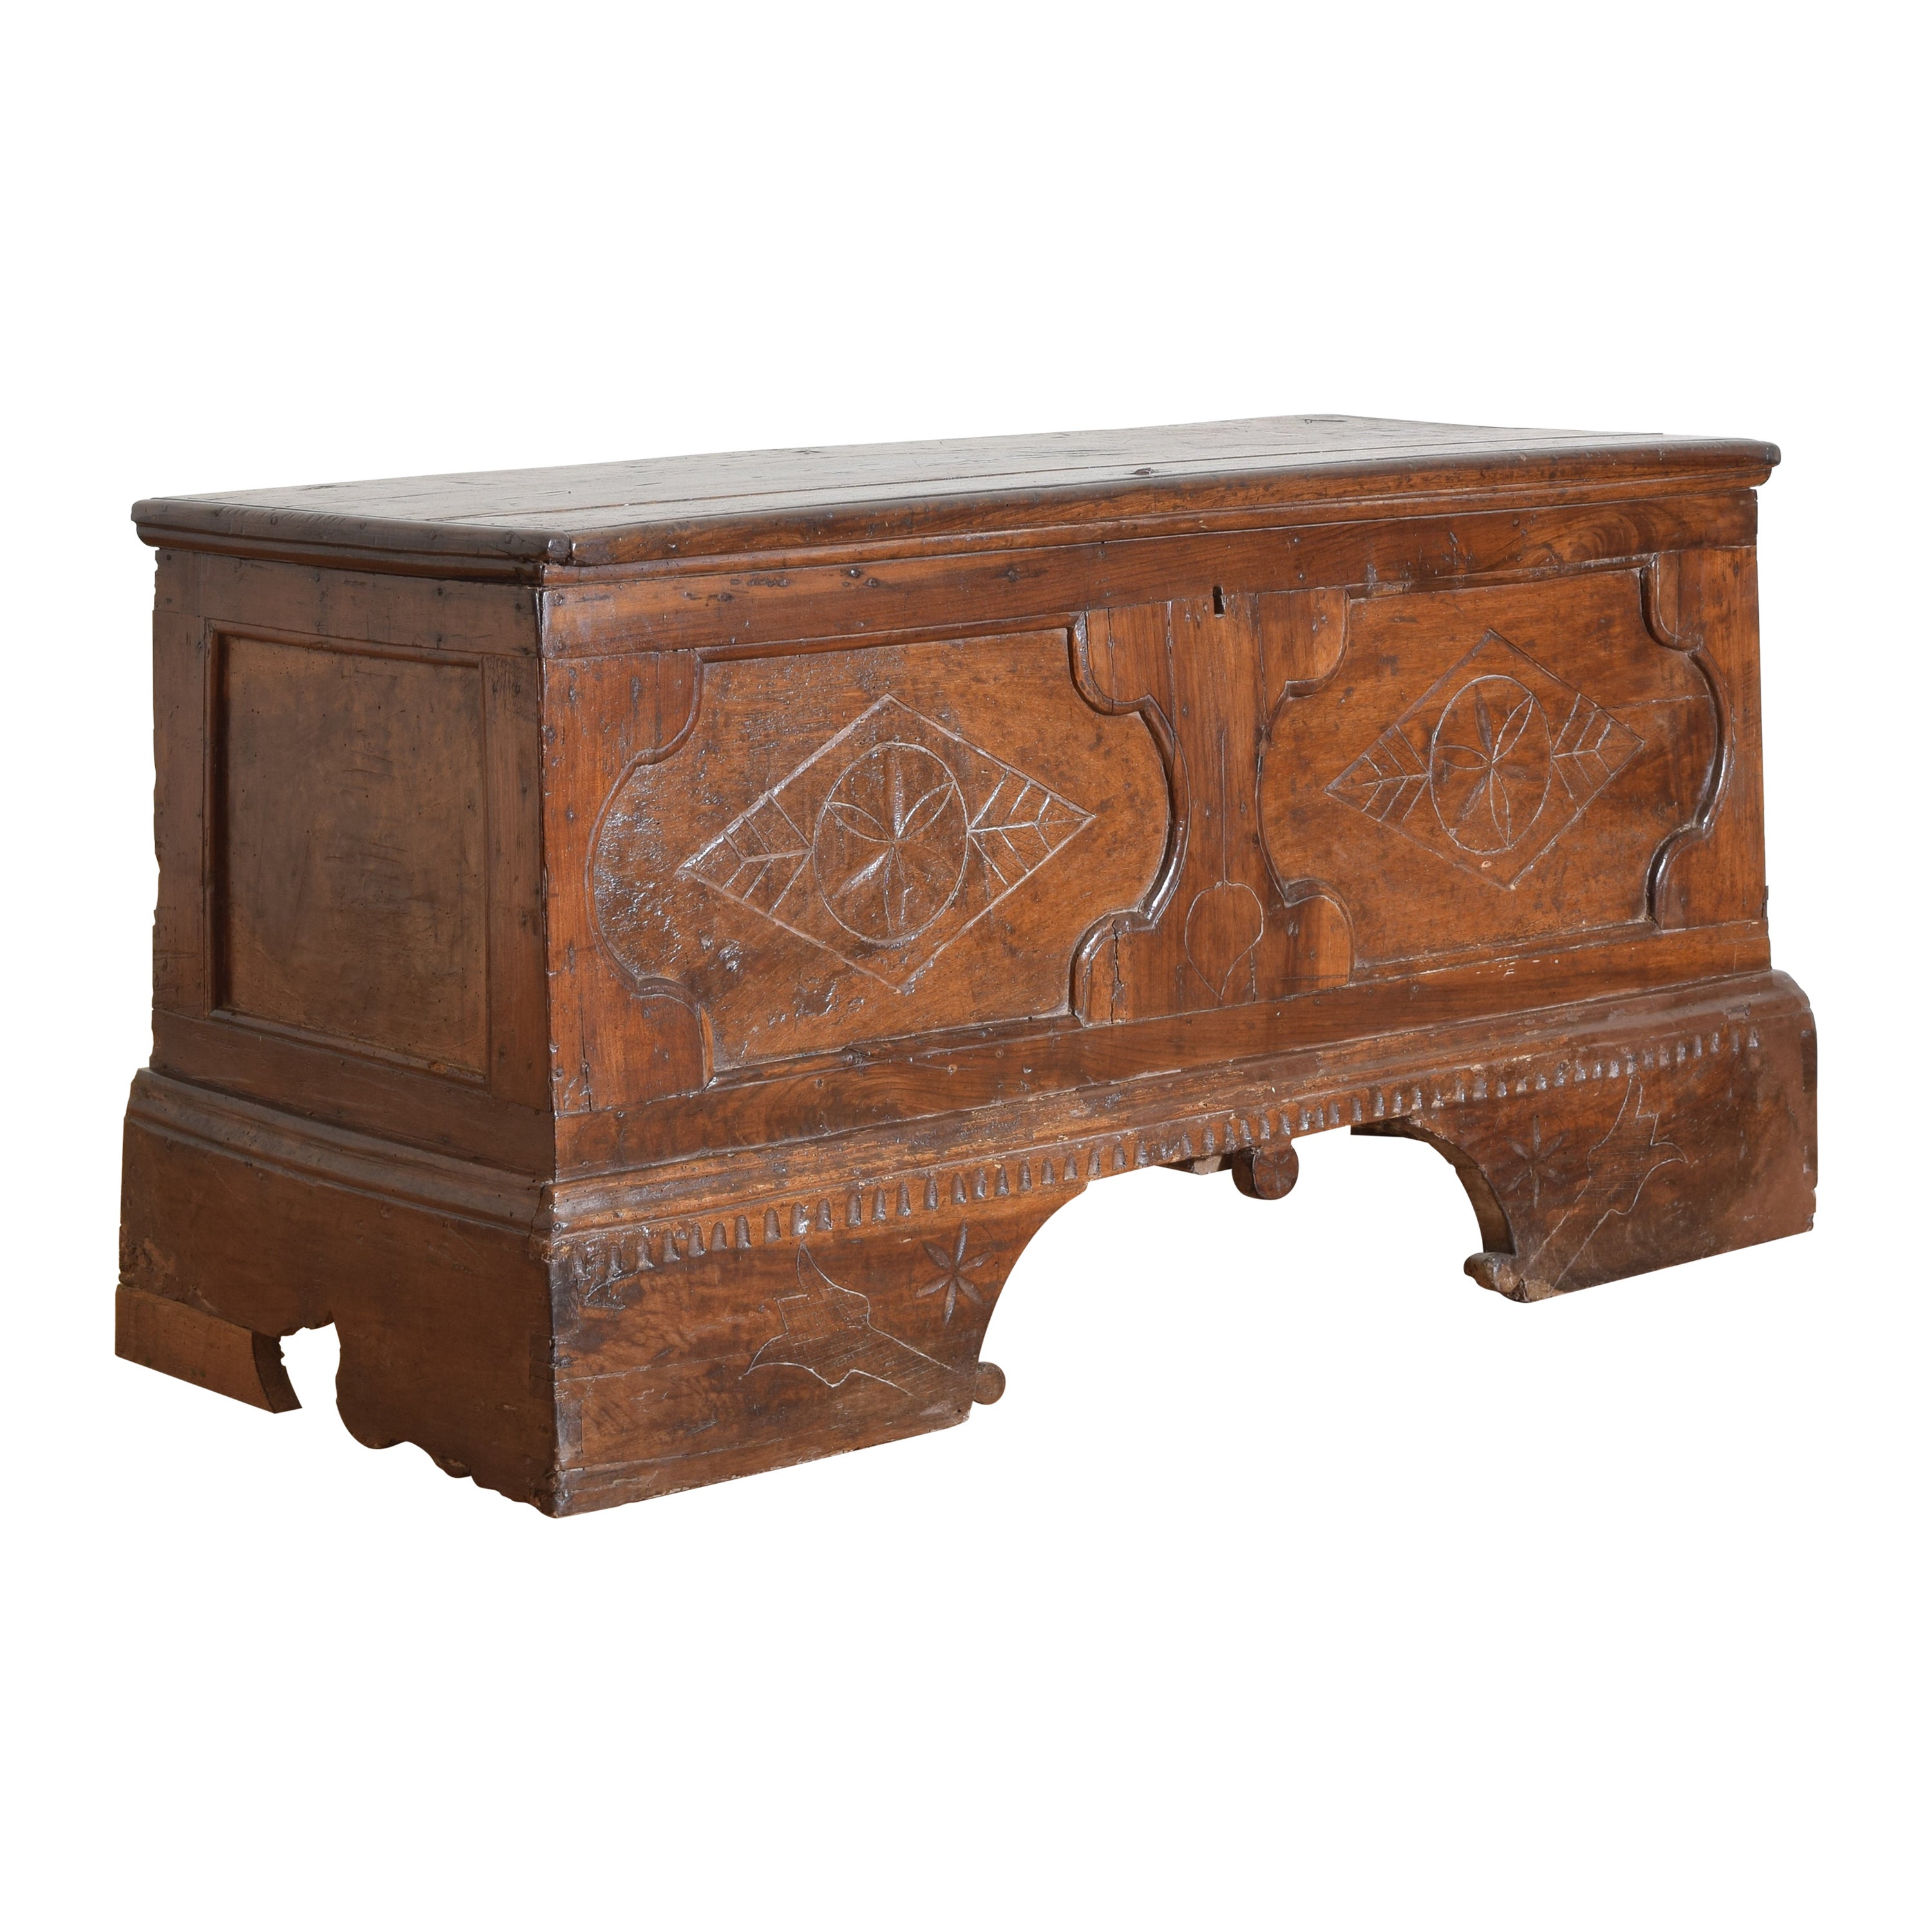 Italian / Southern Tyrolean Carved Walnut Paneled Cassapanca, mid 17th century For Sale